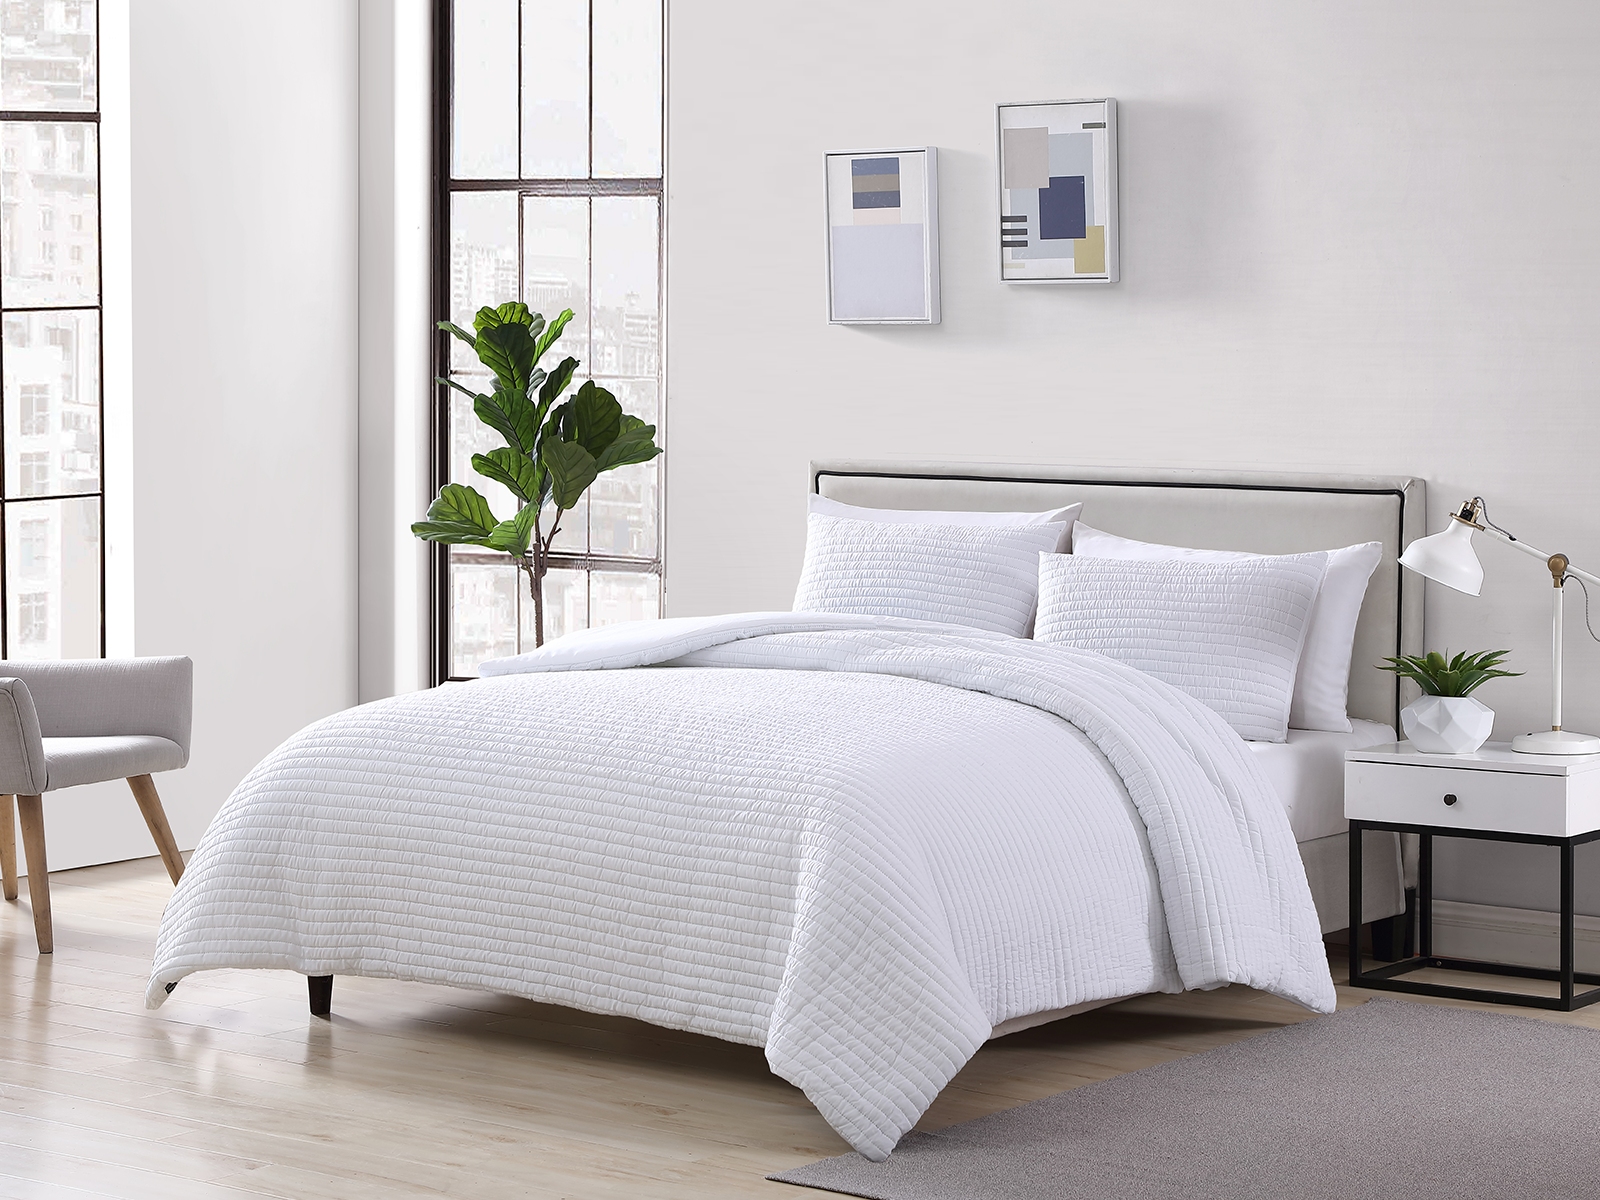 The Nesting Company Queen Palm Comforter Set | White